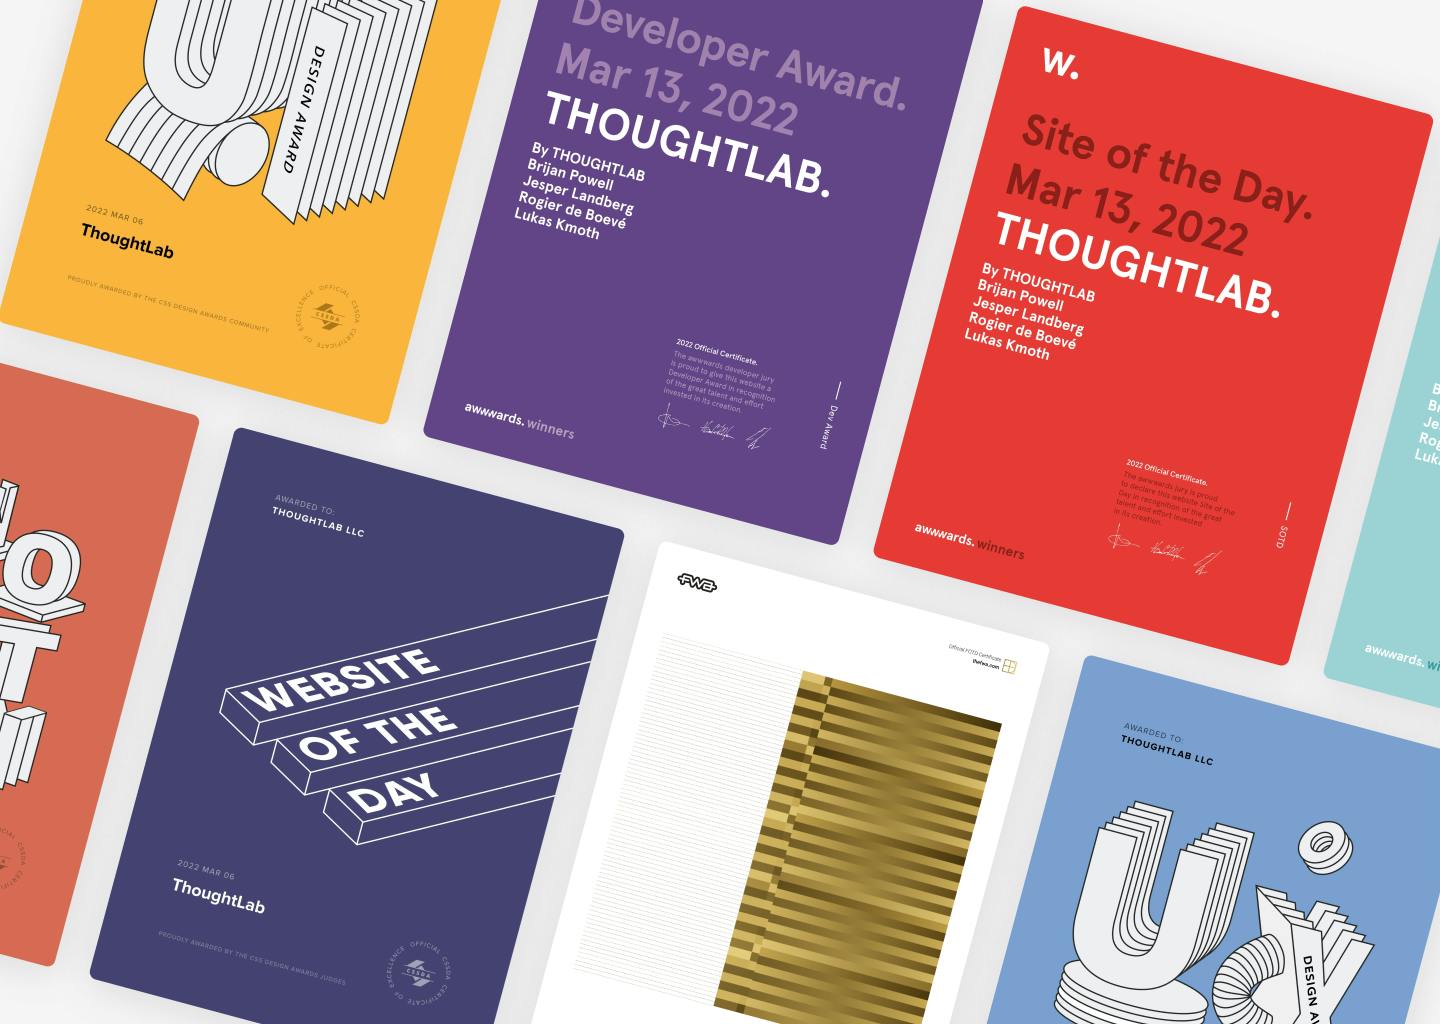 A page of colorful awards ThoughtLab has won.